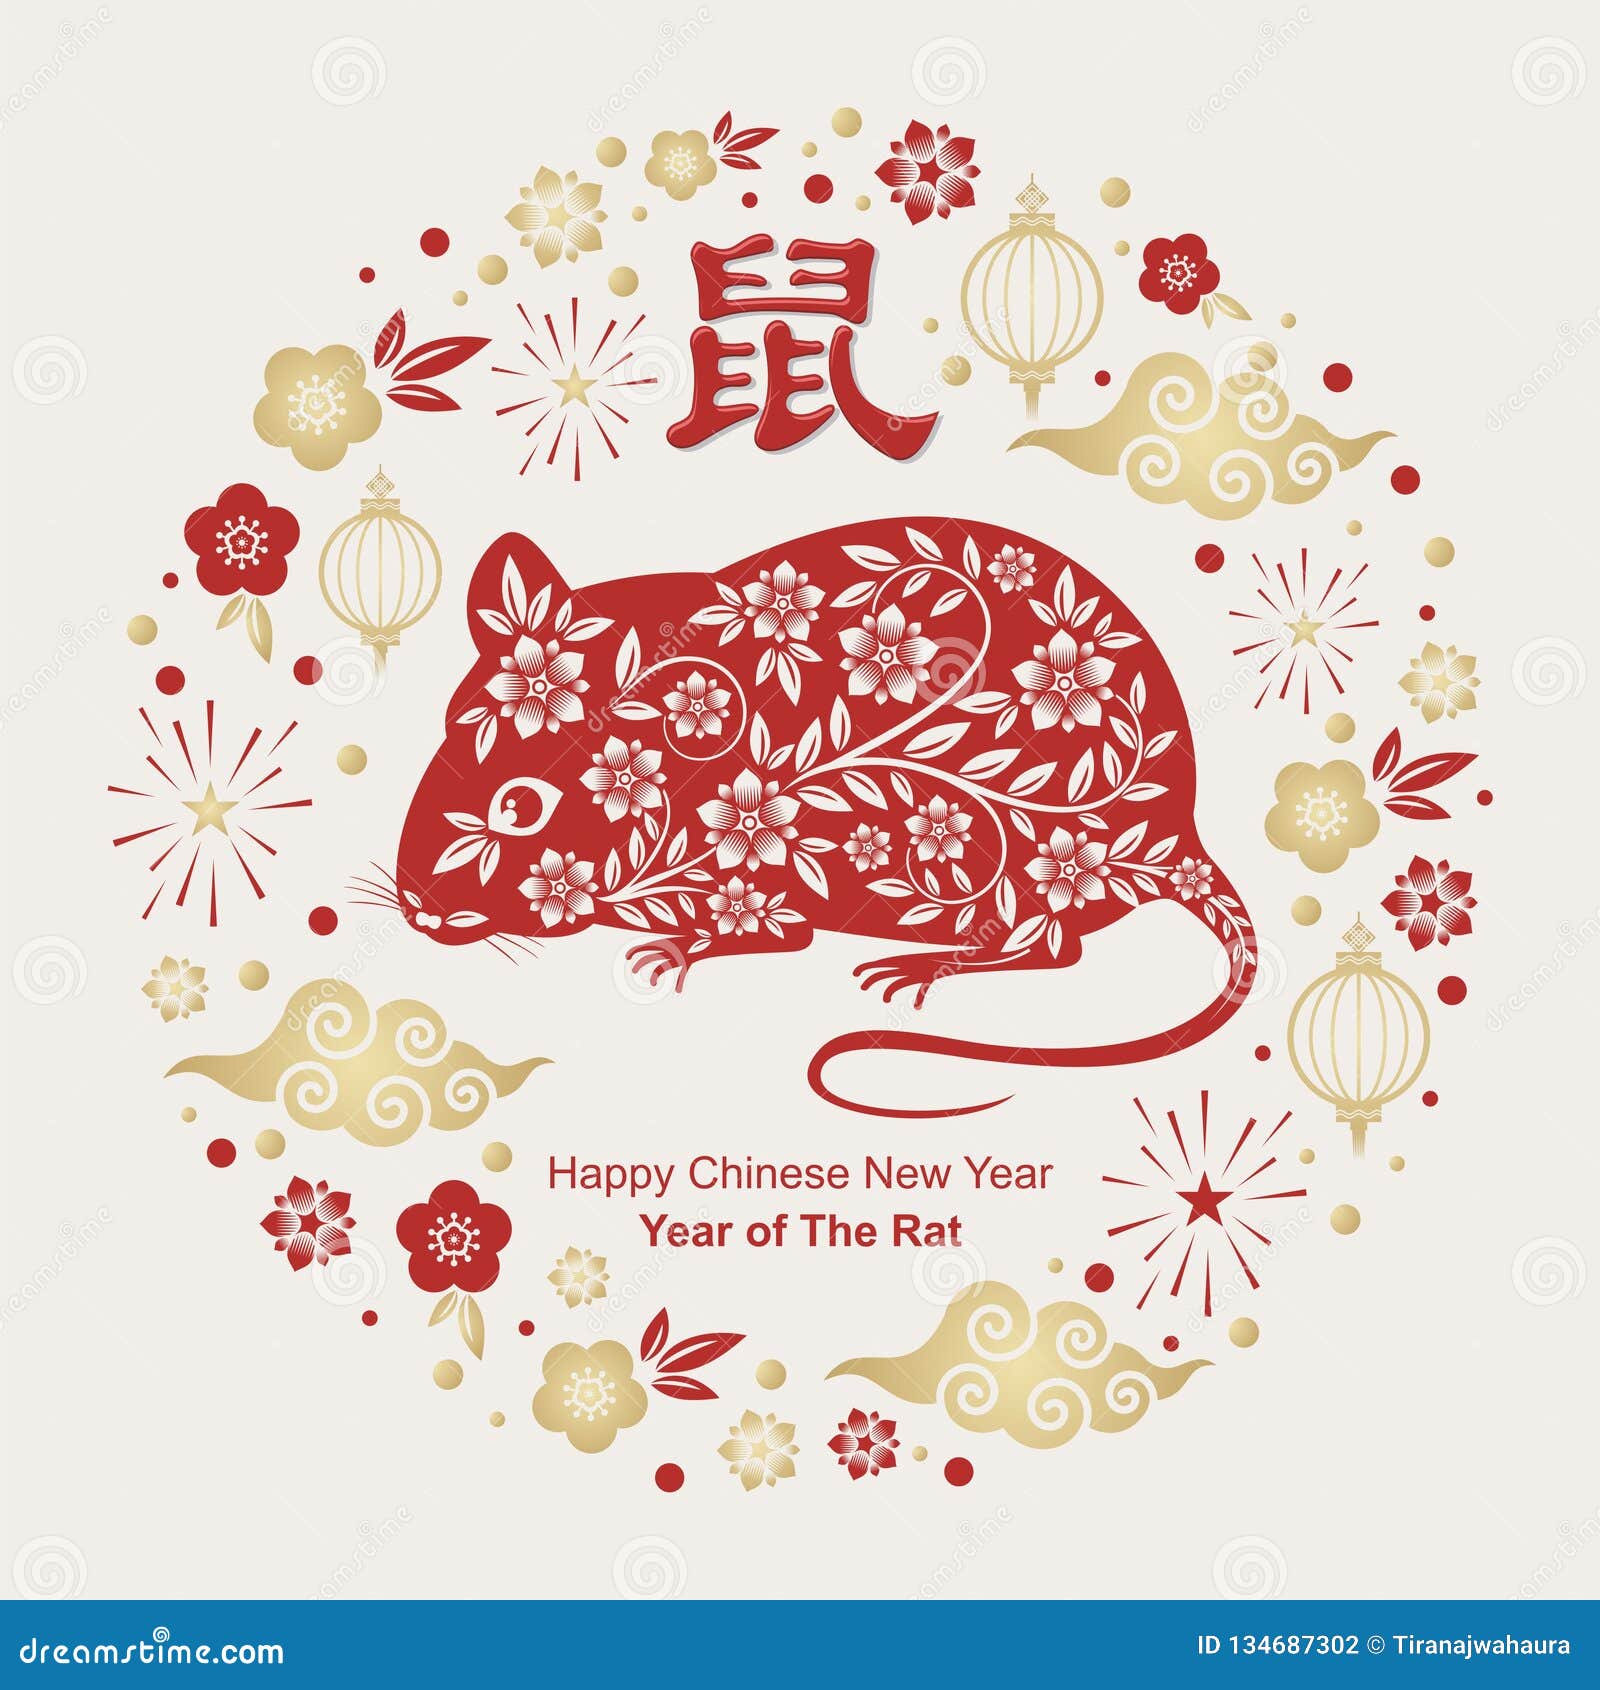 Year Of The Rat, Chinese New Year Vector Design Stock Vector - Illustration of culture ...1600 x 1689